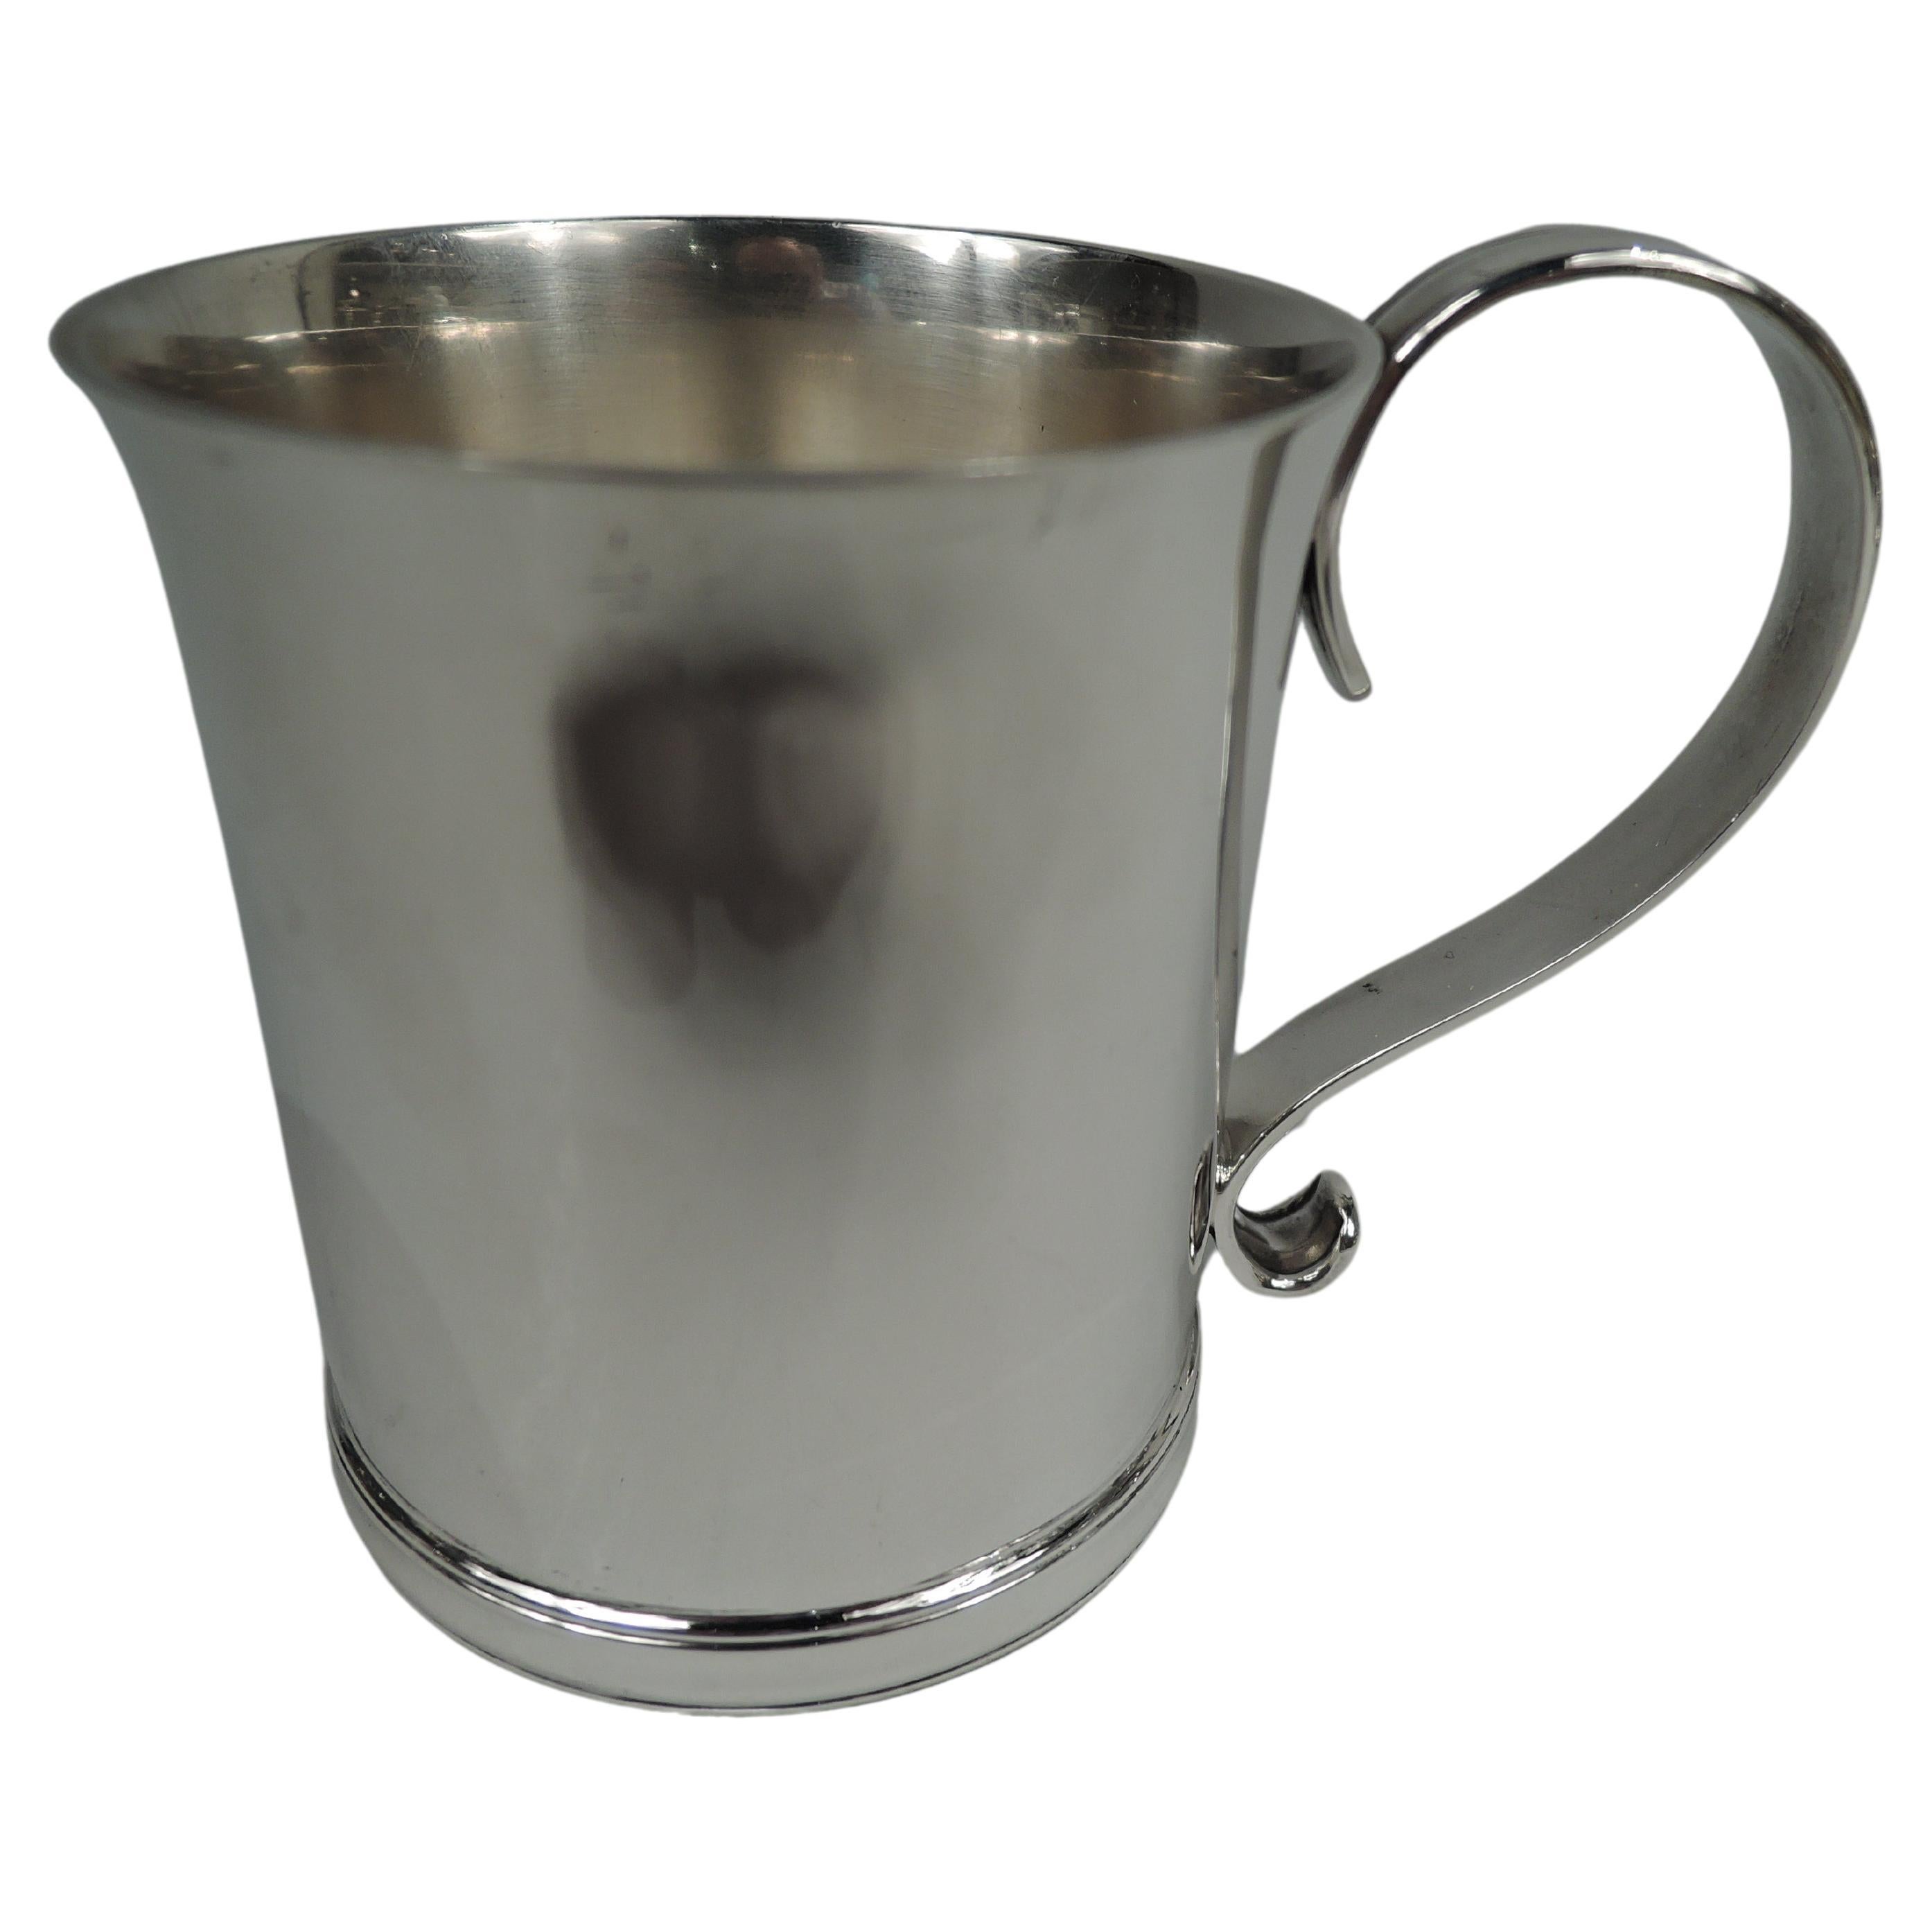 Tiffany American Colonial Revival Sterling Silver Baby Cup